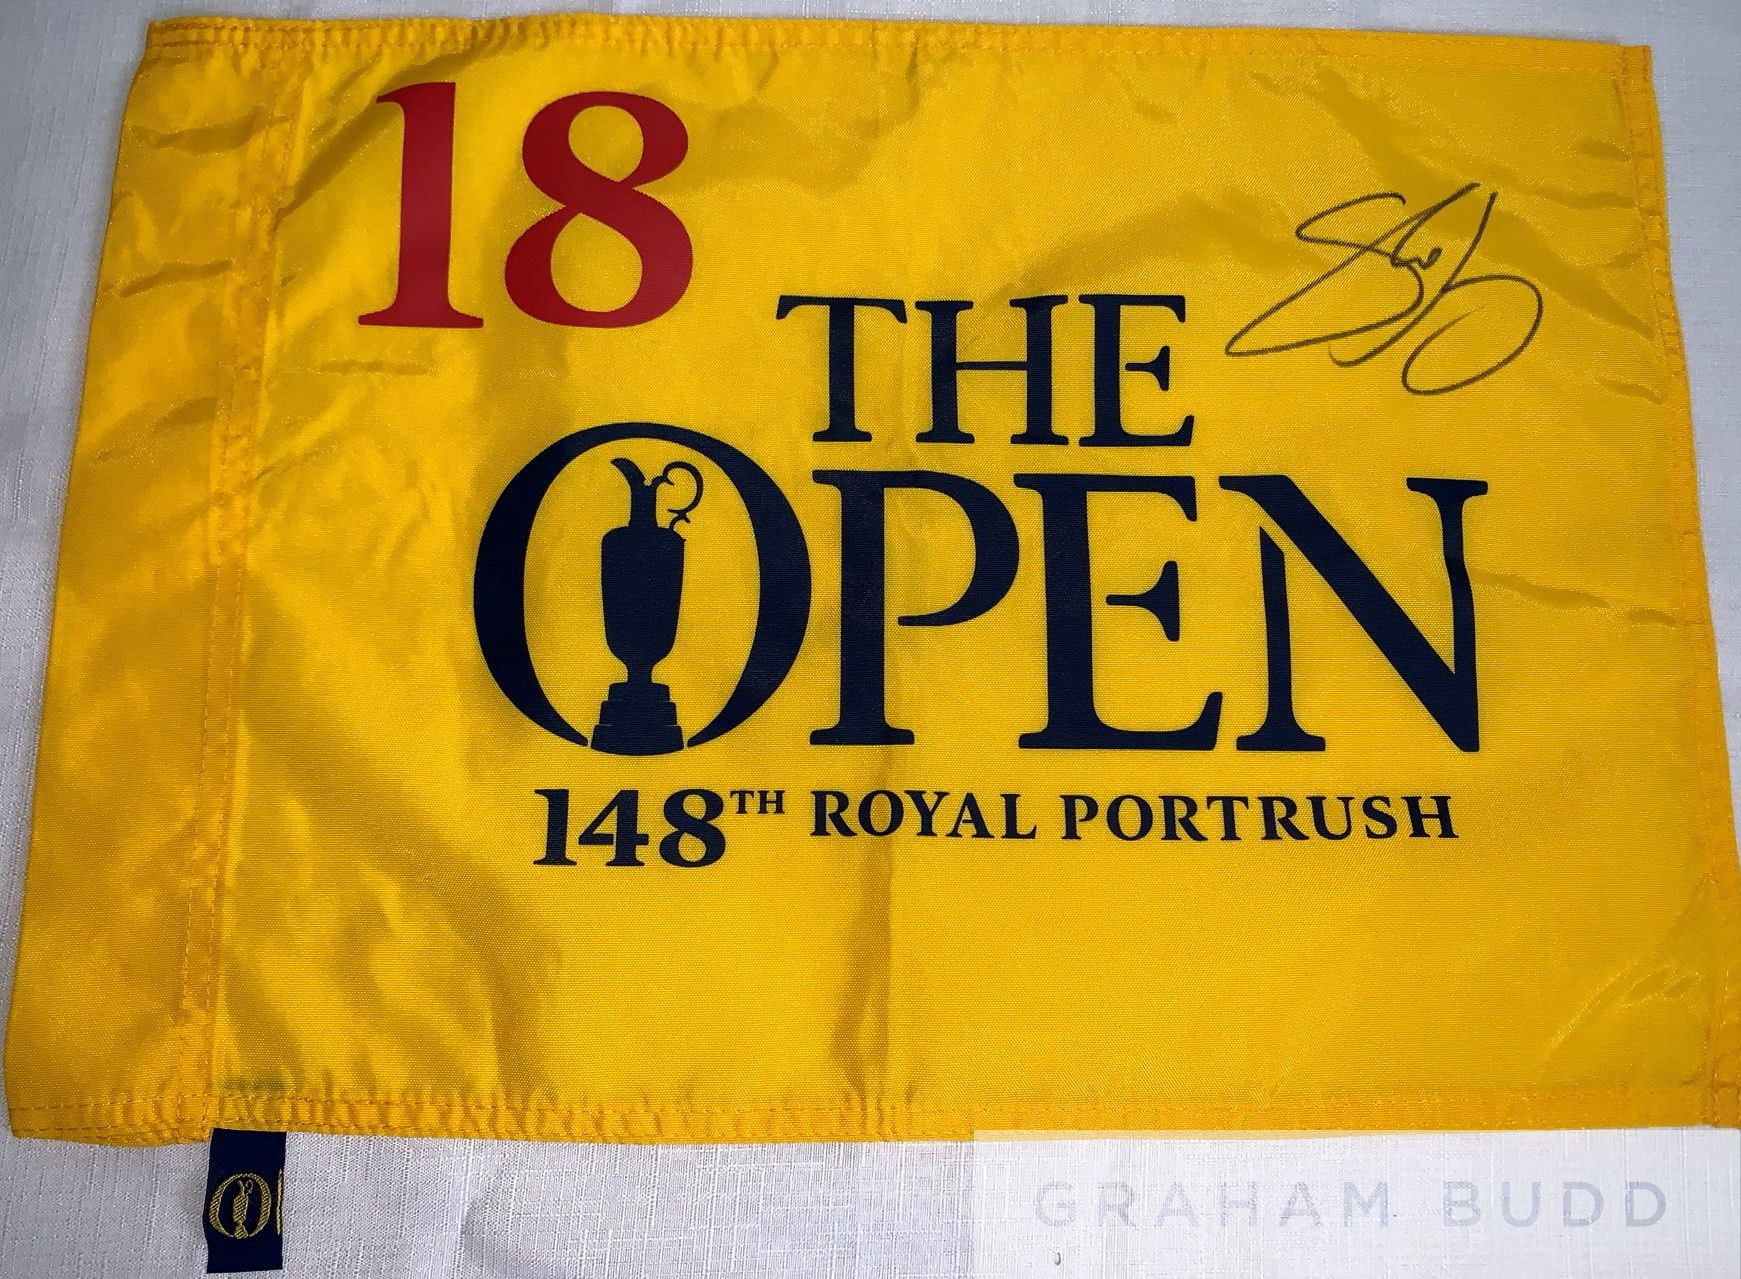 Shane Lowry (Ireland, 2019 Open Champion) signed golf flag and cap,